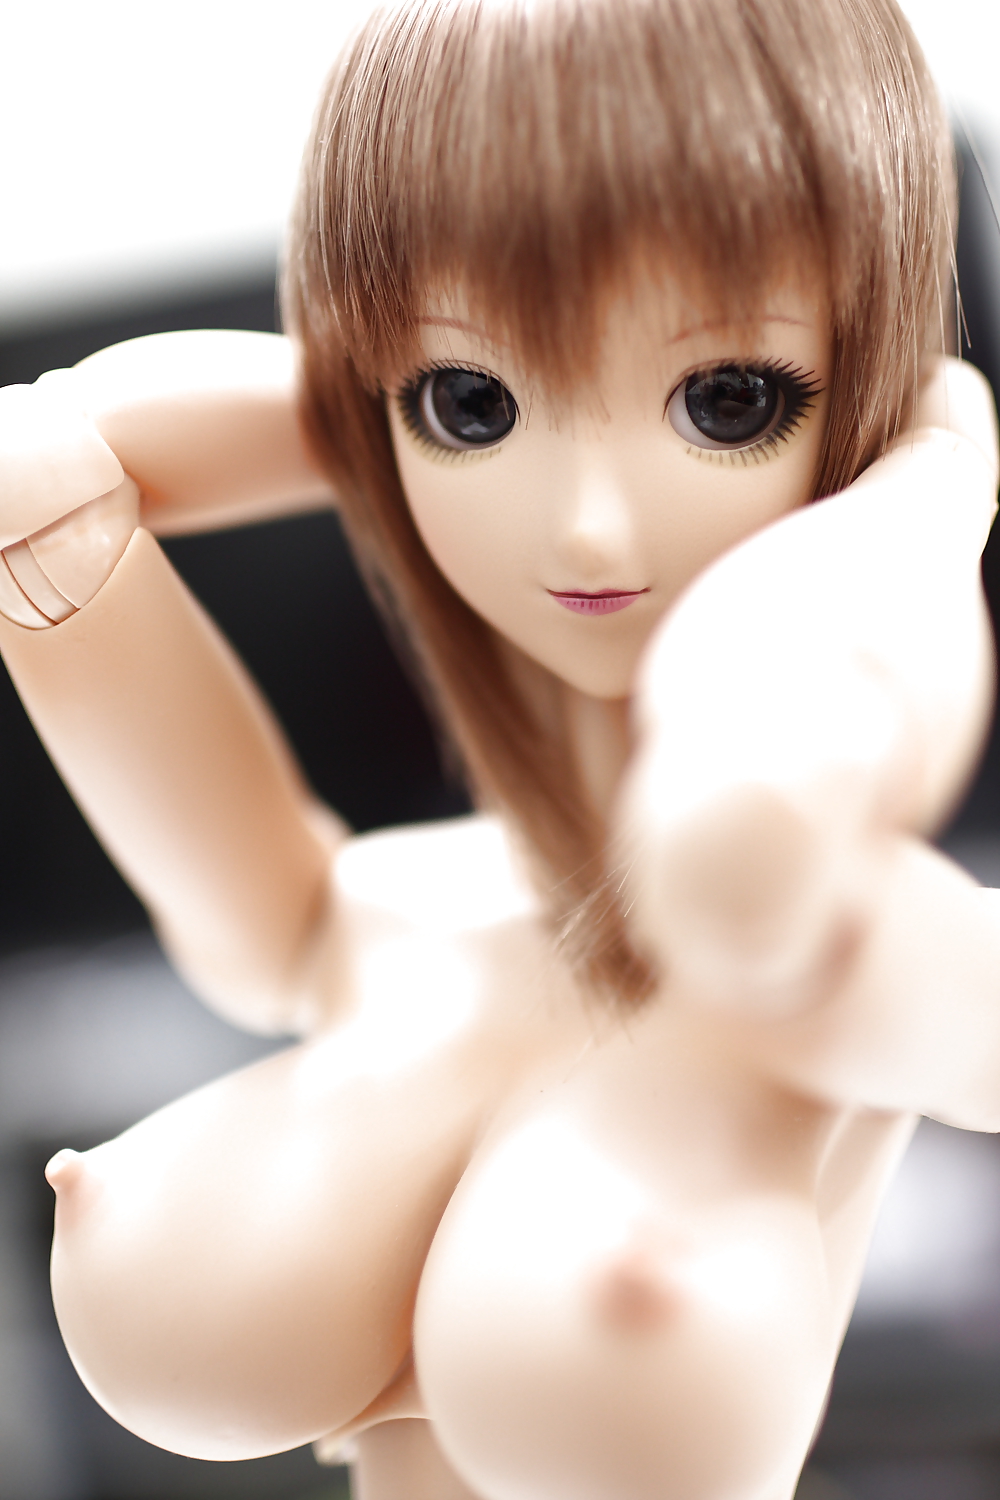 Other People's Dolls 2: Big Tits #36089343